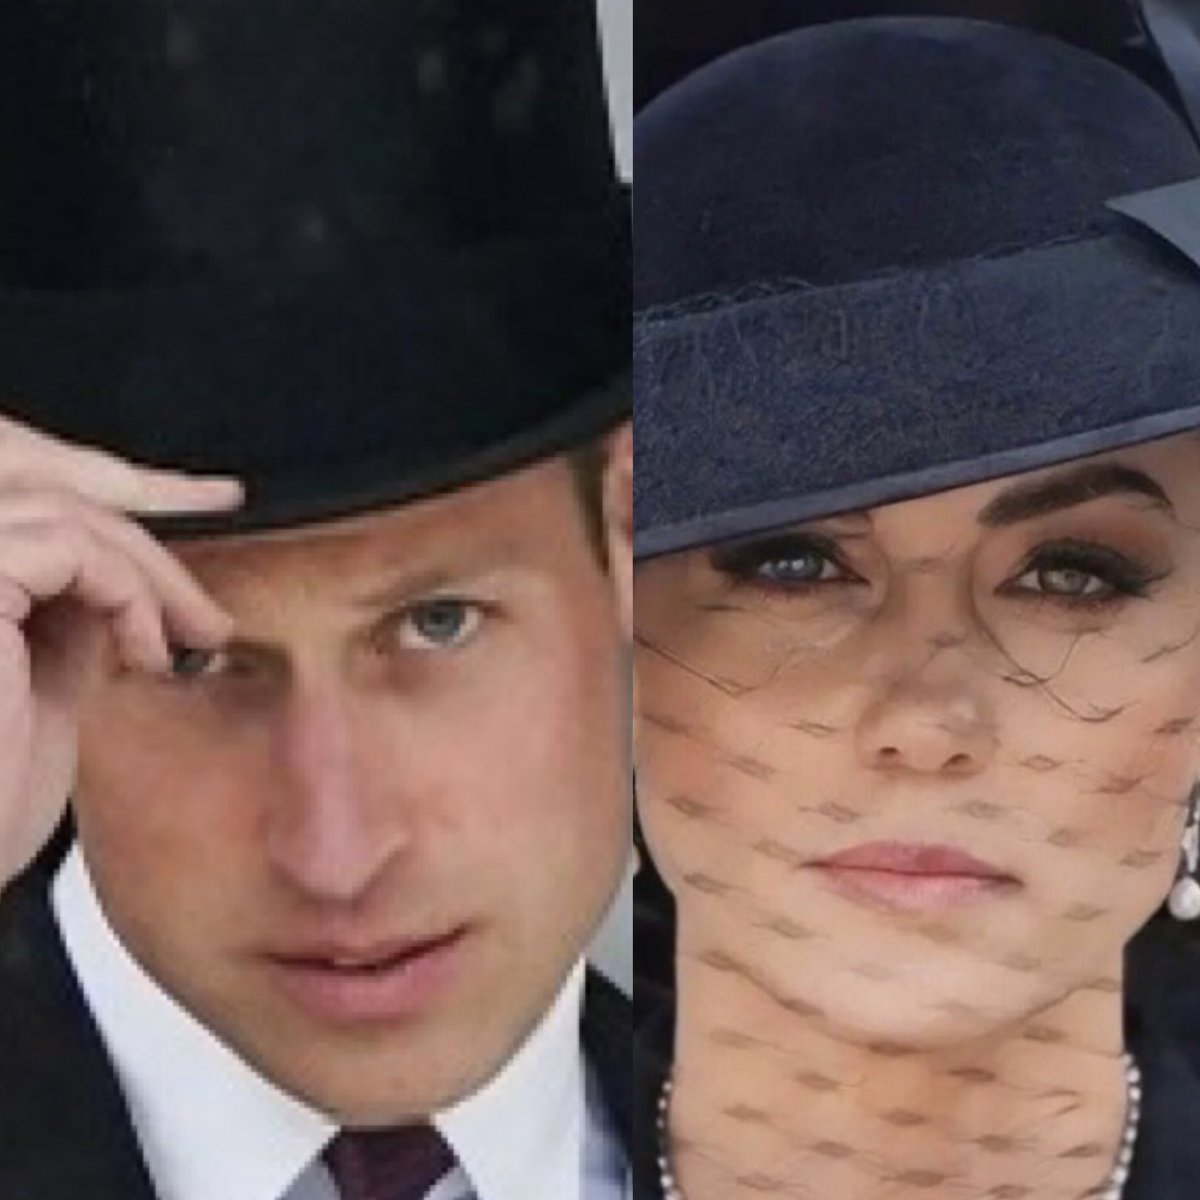 THE most beautiful couple in the world. I had to put these two photos together! Arguing will display your own stupidity. #PrinceWilliam #CatherinePrincessOfWales